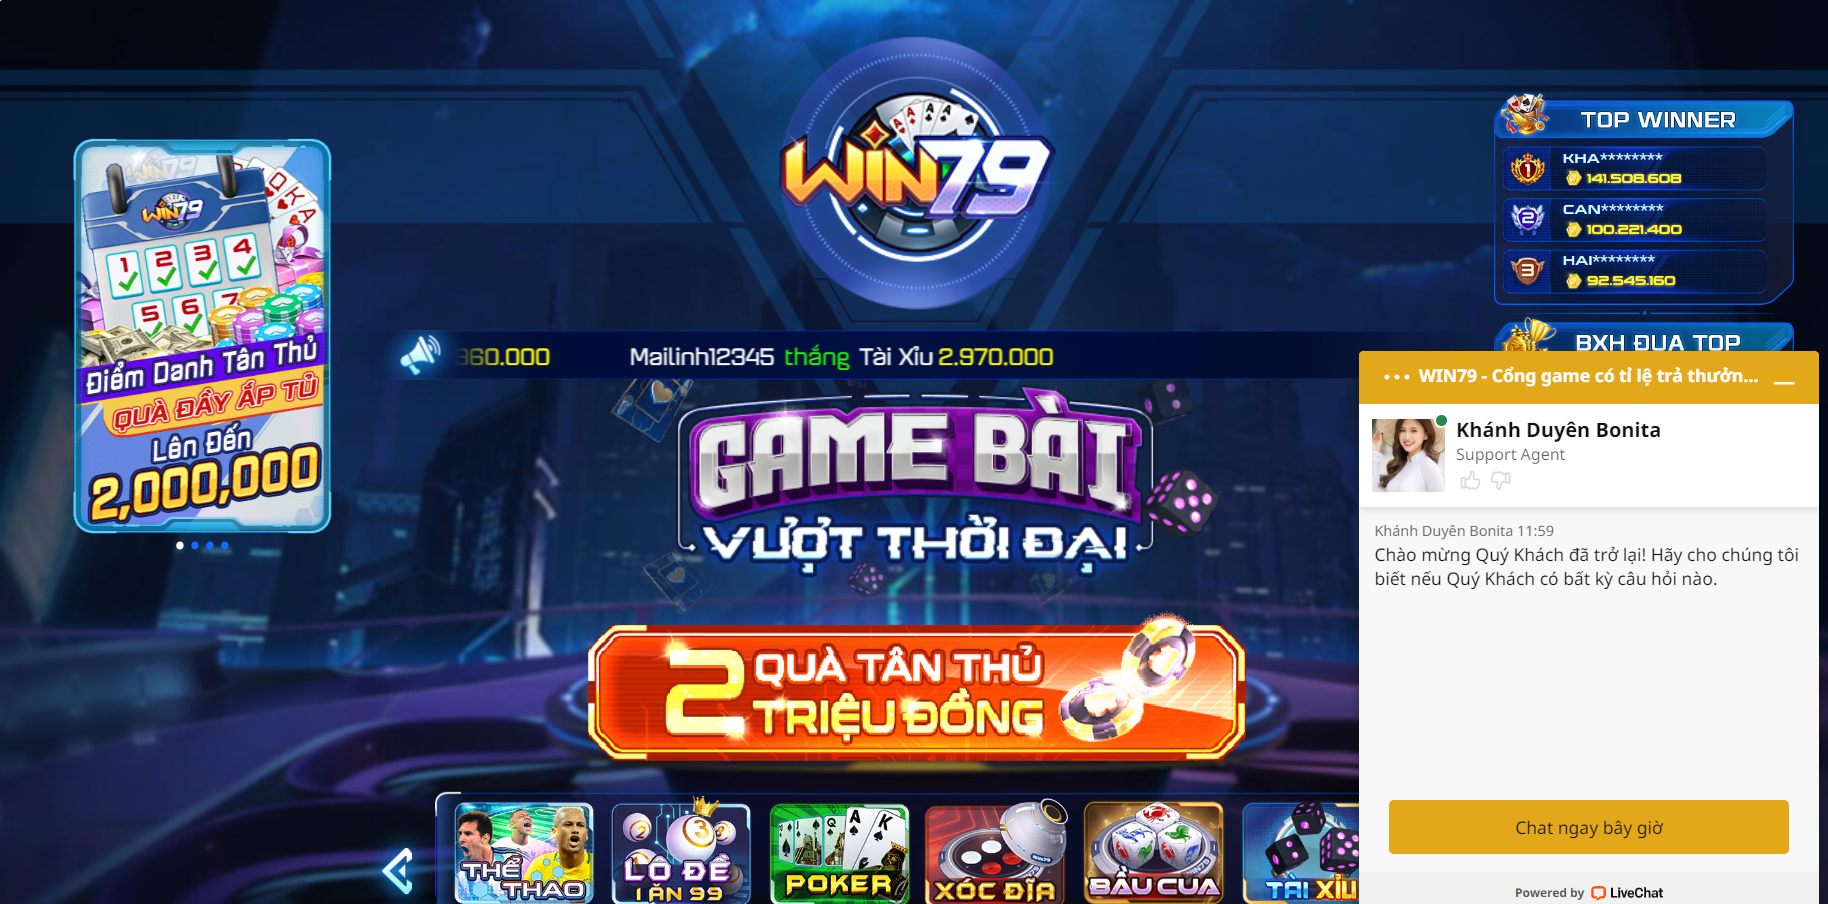 Giao diện Live chat của cổng game Win79 